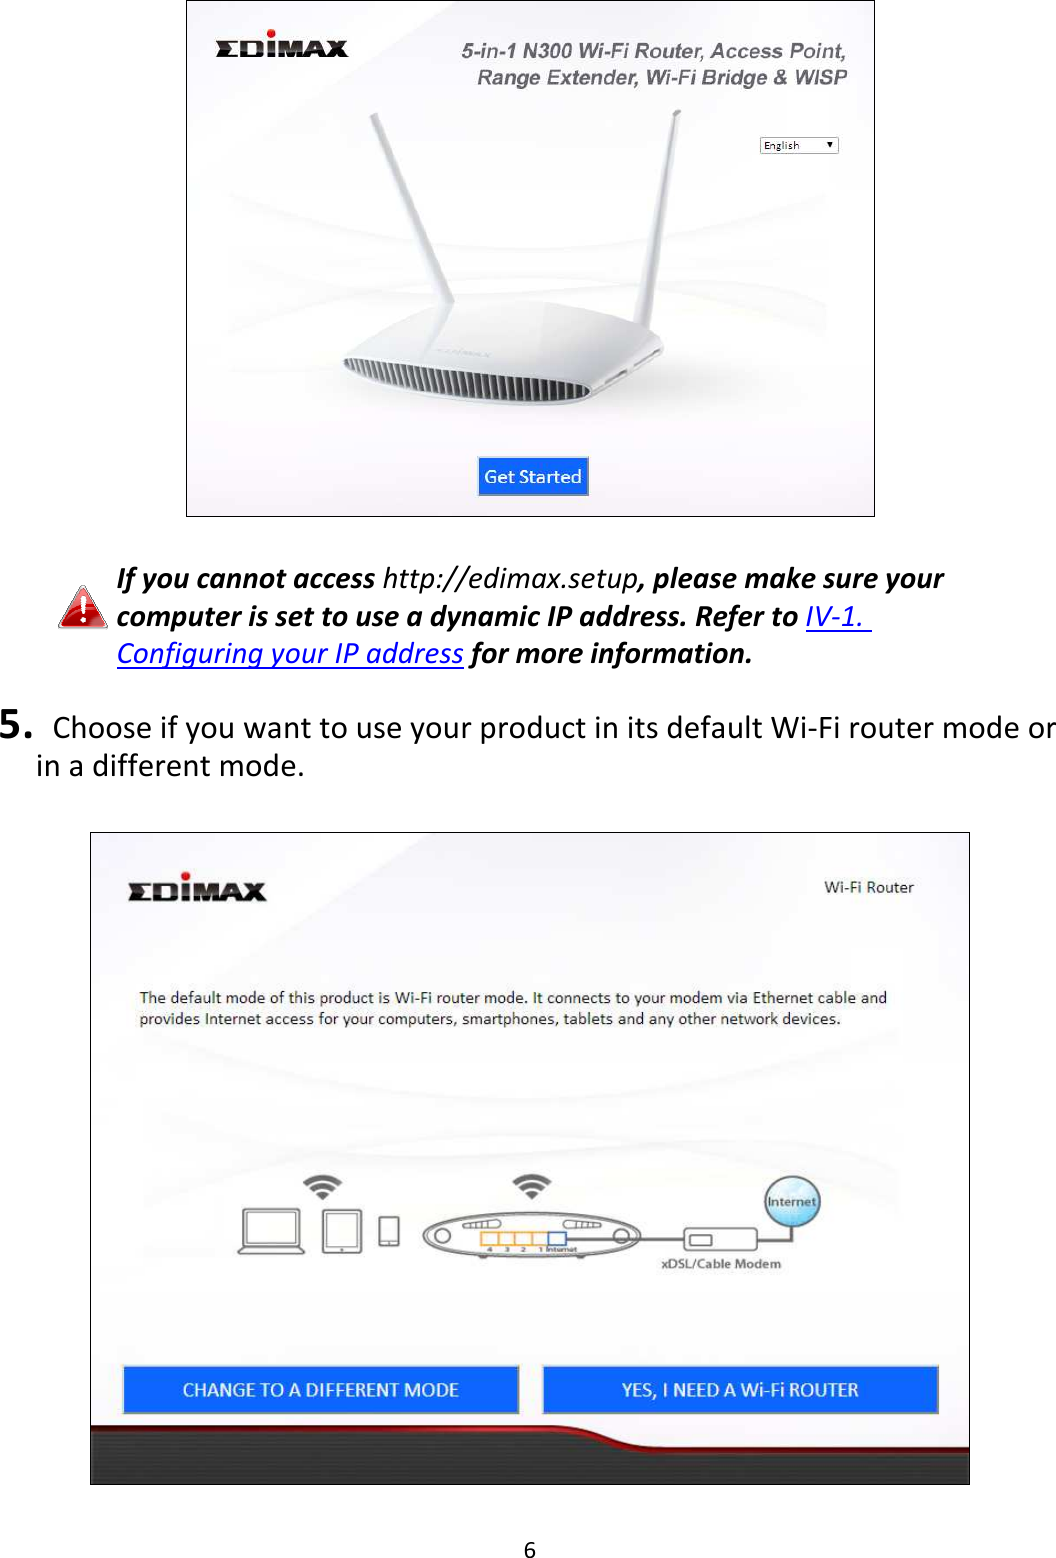 6    If you cannot access http://edimax.setup, please make sure your computer is set to use a dynamic IP address. Refer to IV-1. Configuring your IP address for more information.  5.   Choose if you want to use your product in its default Wi-Fi router mode or in a different mode.    